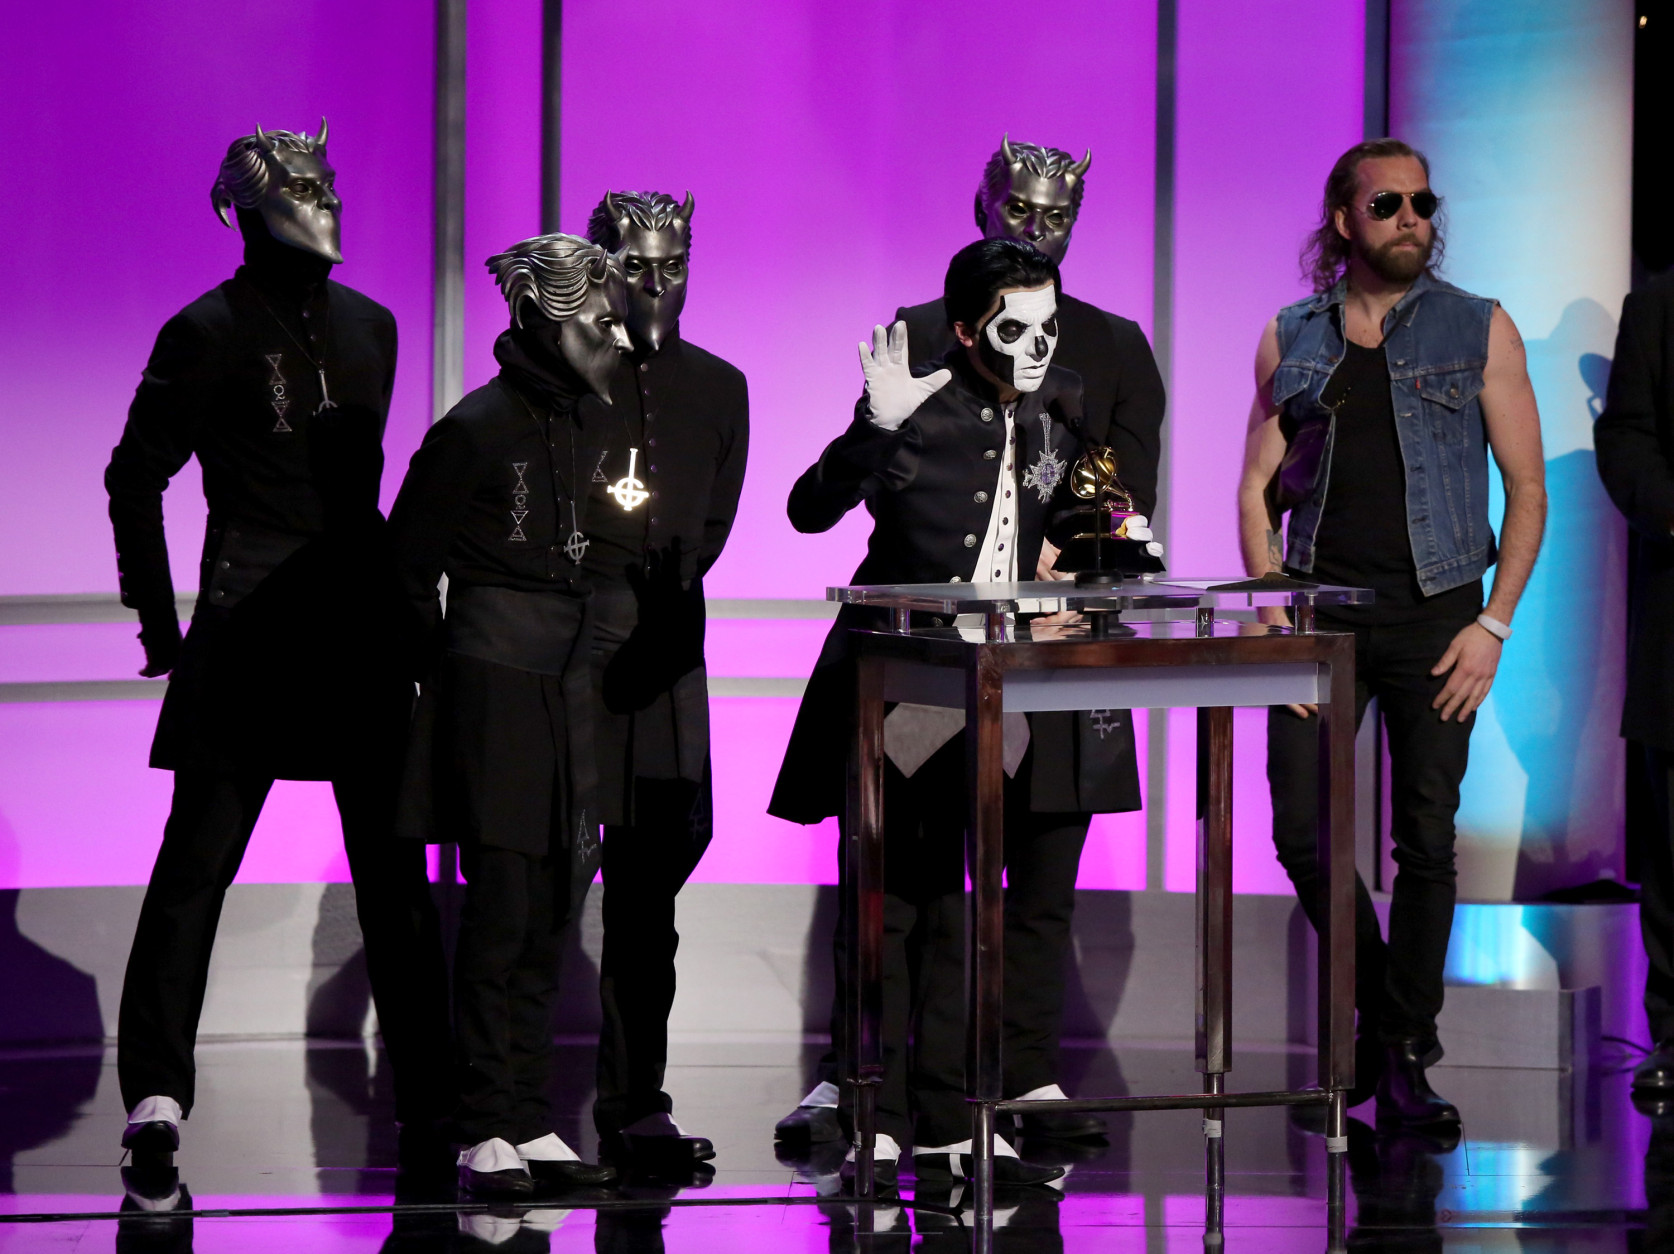 Ghost accepts the award for best metal performance for Cirice at the 58th annual Grammy Awards on Monday, Feb. 15, 2016, in Los Angeles. (Photo by Matt Sayles/Invision/AP)